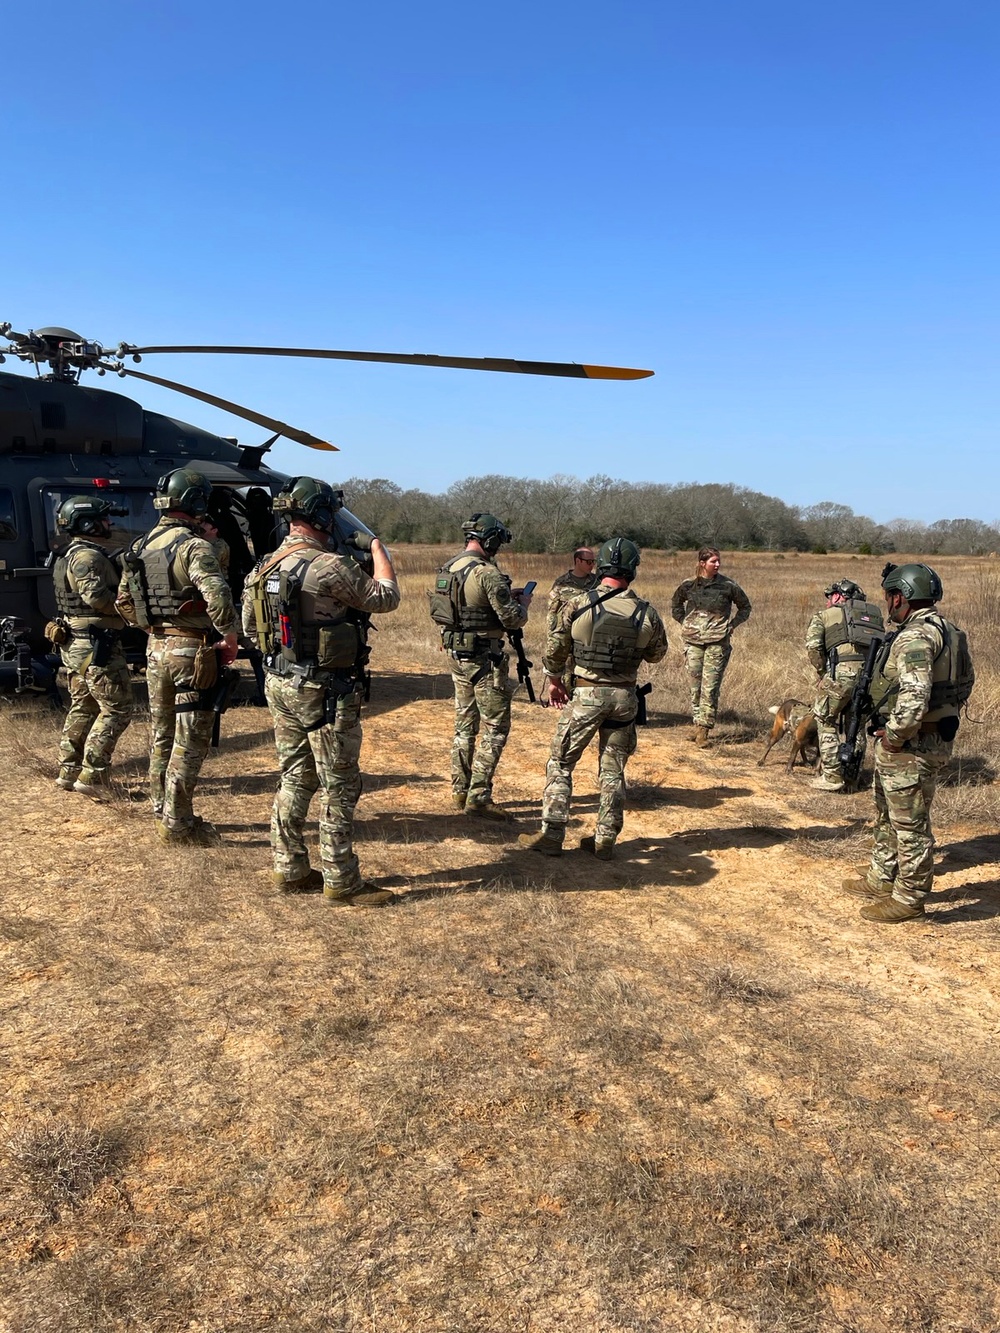 Texas Counterdrug aviation helps local sheriff's office train aerial insertion operations